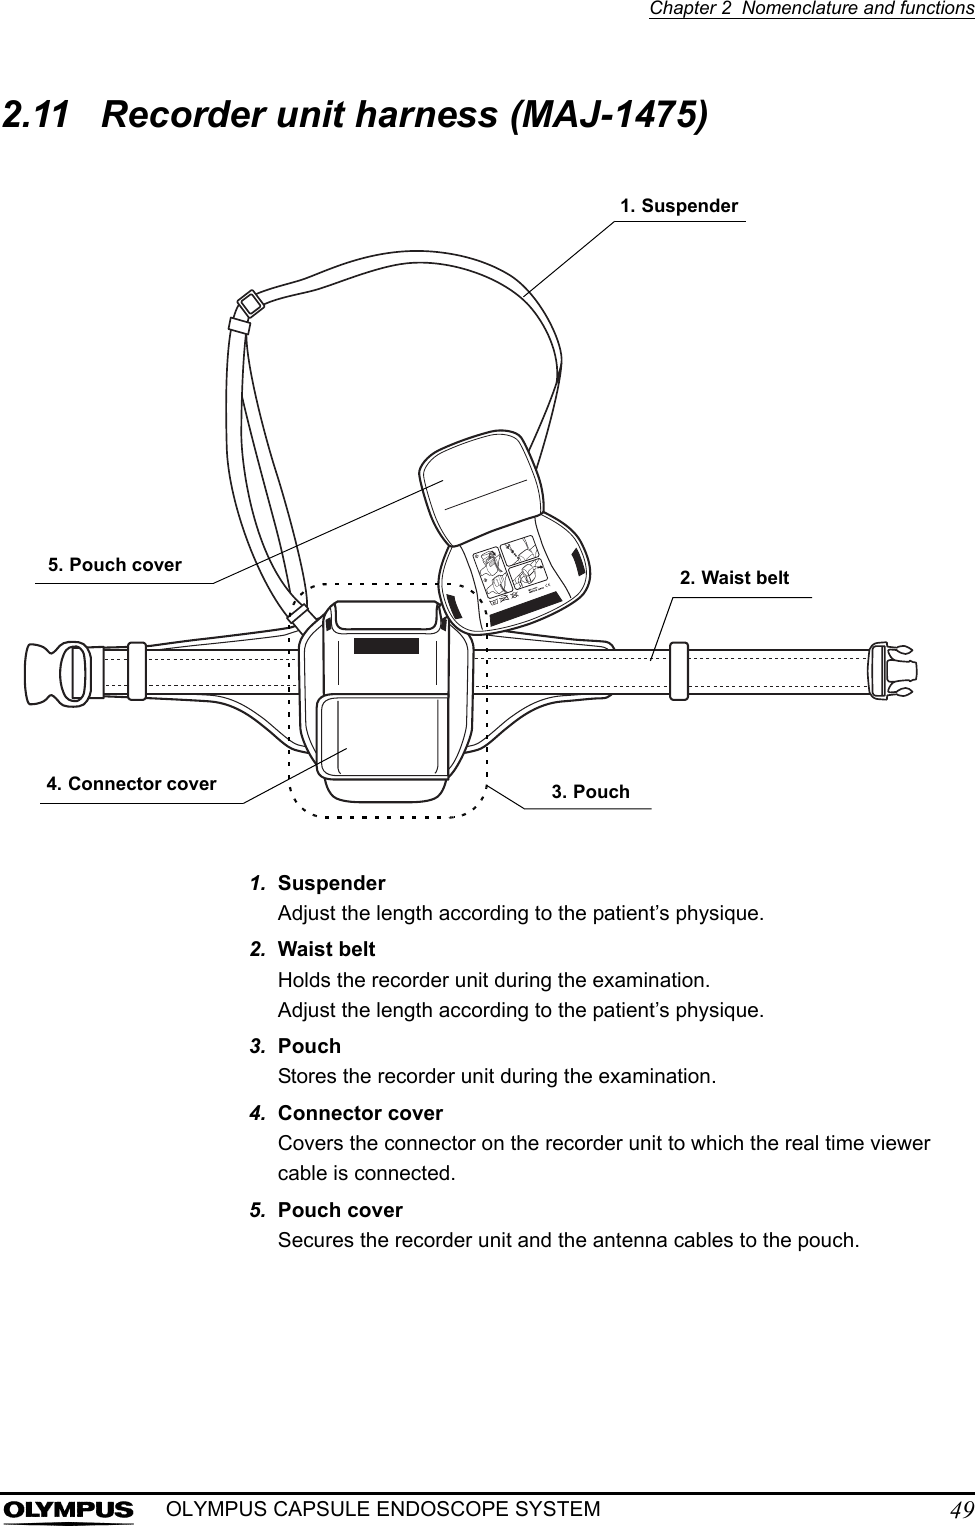 Chapter 2  Nomenclature and functions49OLYMPUS CAPSULE ENDOSCOPE SYSTEM2.11 Recorder unit harness (MAJ-1475)1. SuspenderAdjust the length according to the patient’s physique.2. Waist beltHolds the recorder unit during the examination.Adjust the length according to the patient’s physique.3. PouchStores the recorder unit during the examination.4. Connector coverCovers the connector on the recorder unit to which the real time viewer cable is connected.5. Pouch coverSecures the recorder unit and the antenna cables to the pouch.1. Suspender3. Pouch2. Waist belt5. Pouch cover4. Connector cover